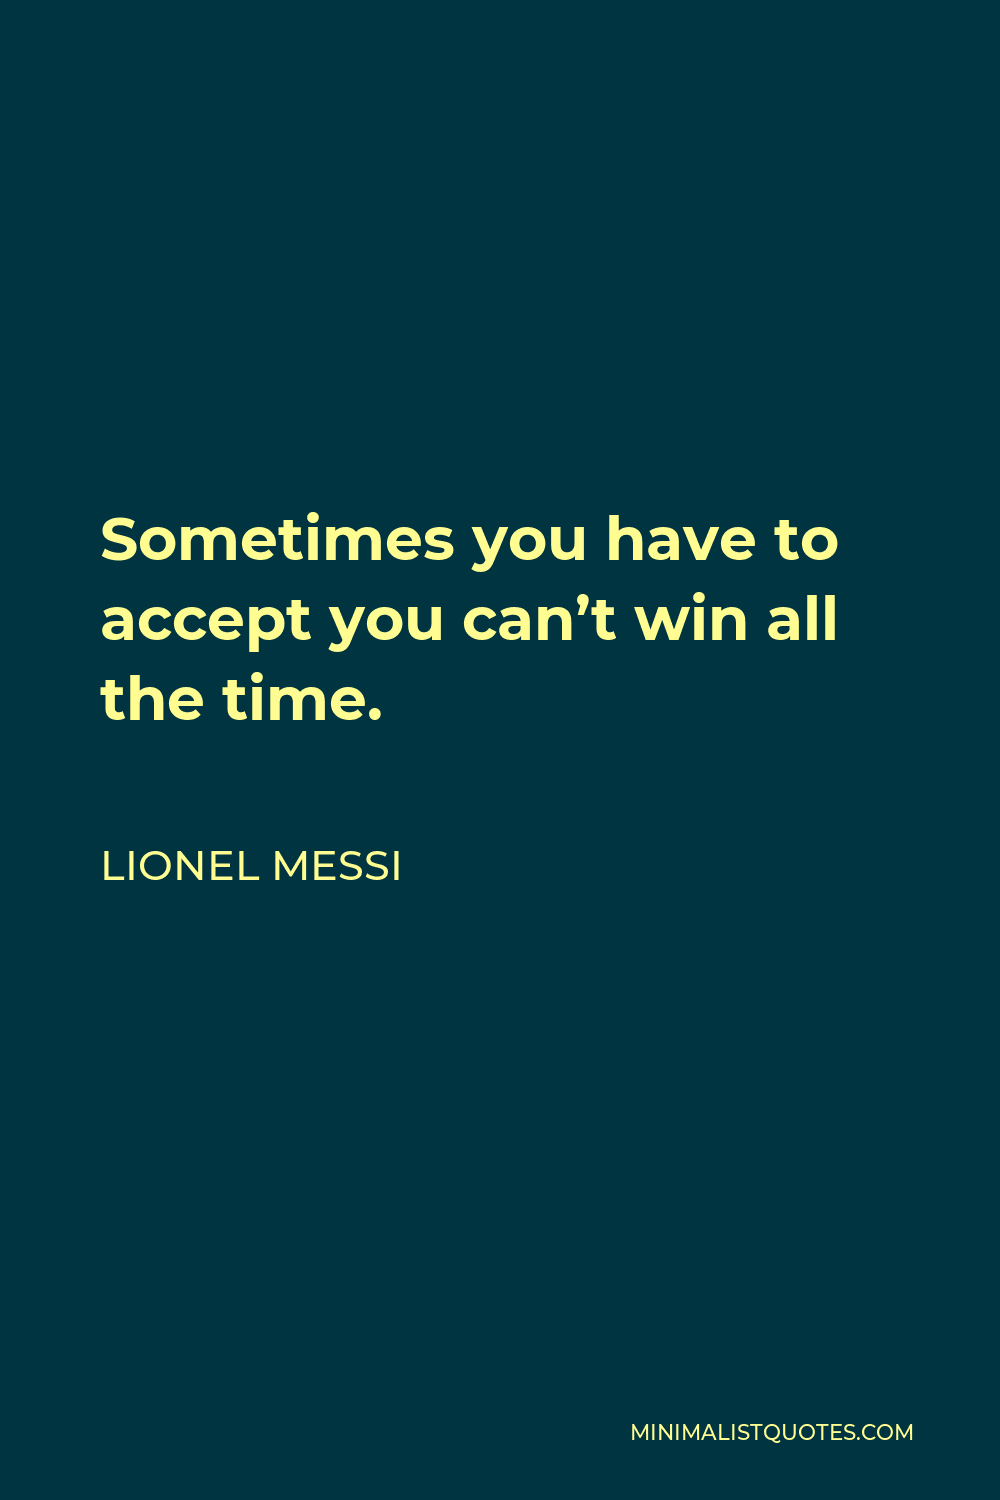 Lionel Messi Quote - Sometimes you have to accept you can’t win all the time.